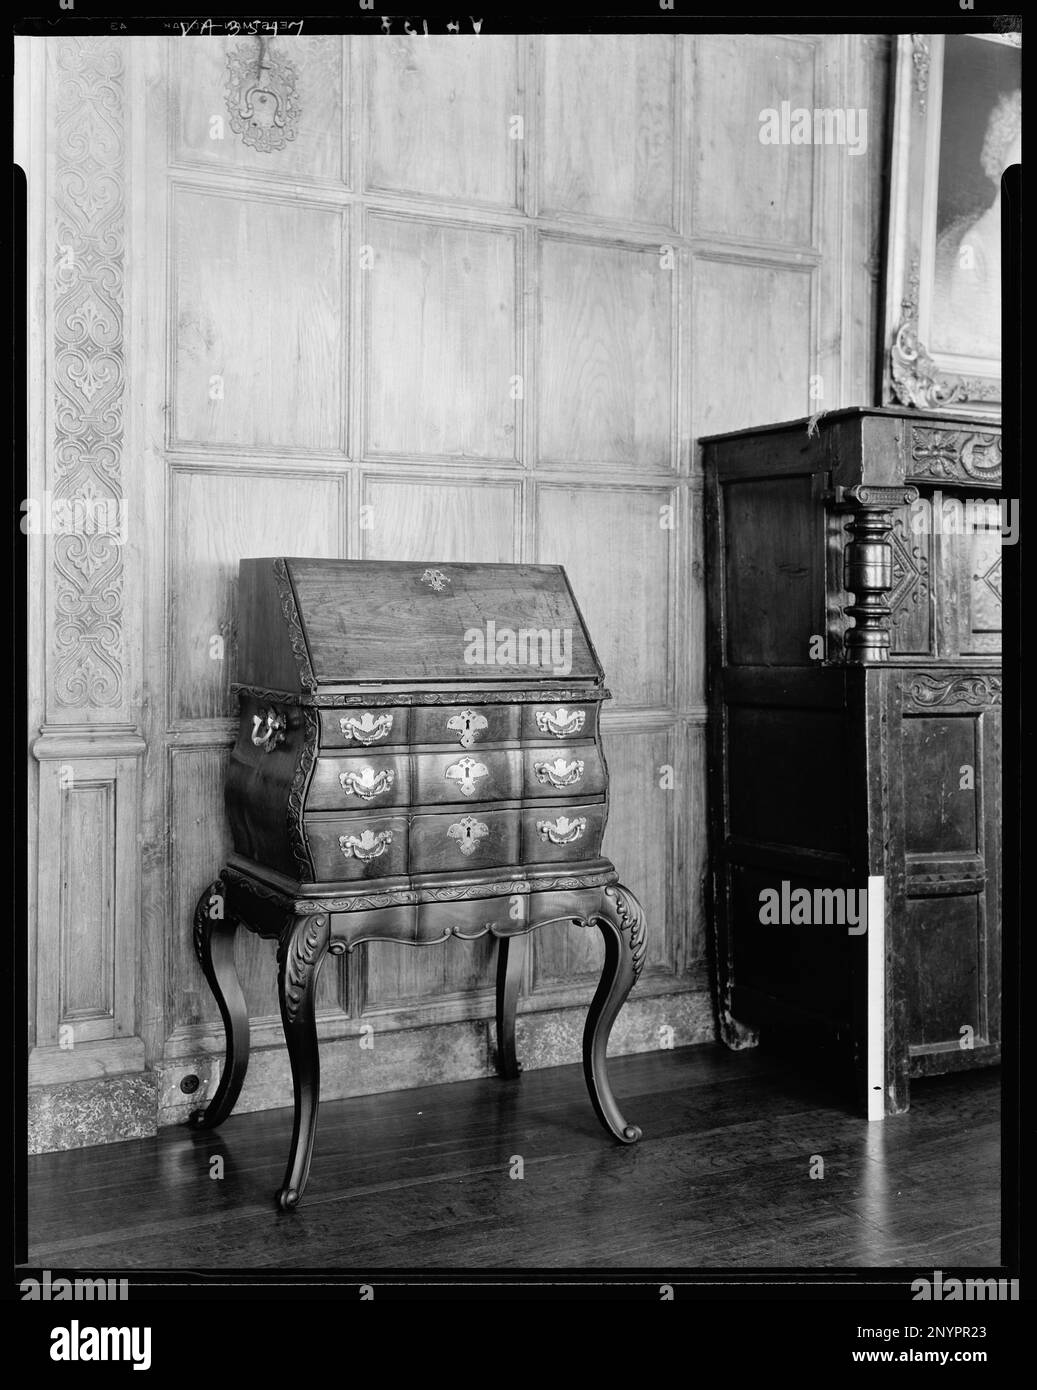 Virginia House, Mexican carved furniture, Richmond, Henrico County, Virginia. Carnegie Survey of the Architecture of the South. United States  Virginia  Henrico County  Richmond, Chests, Paneling, Woodwork. Stock Photo